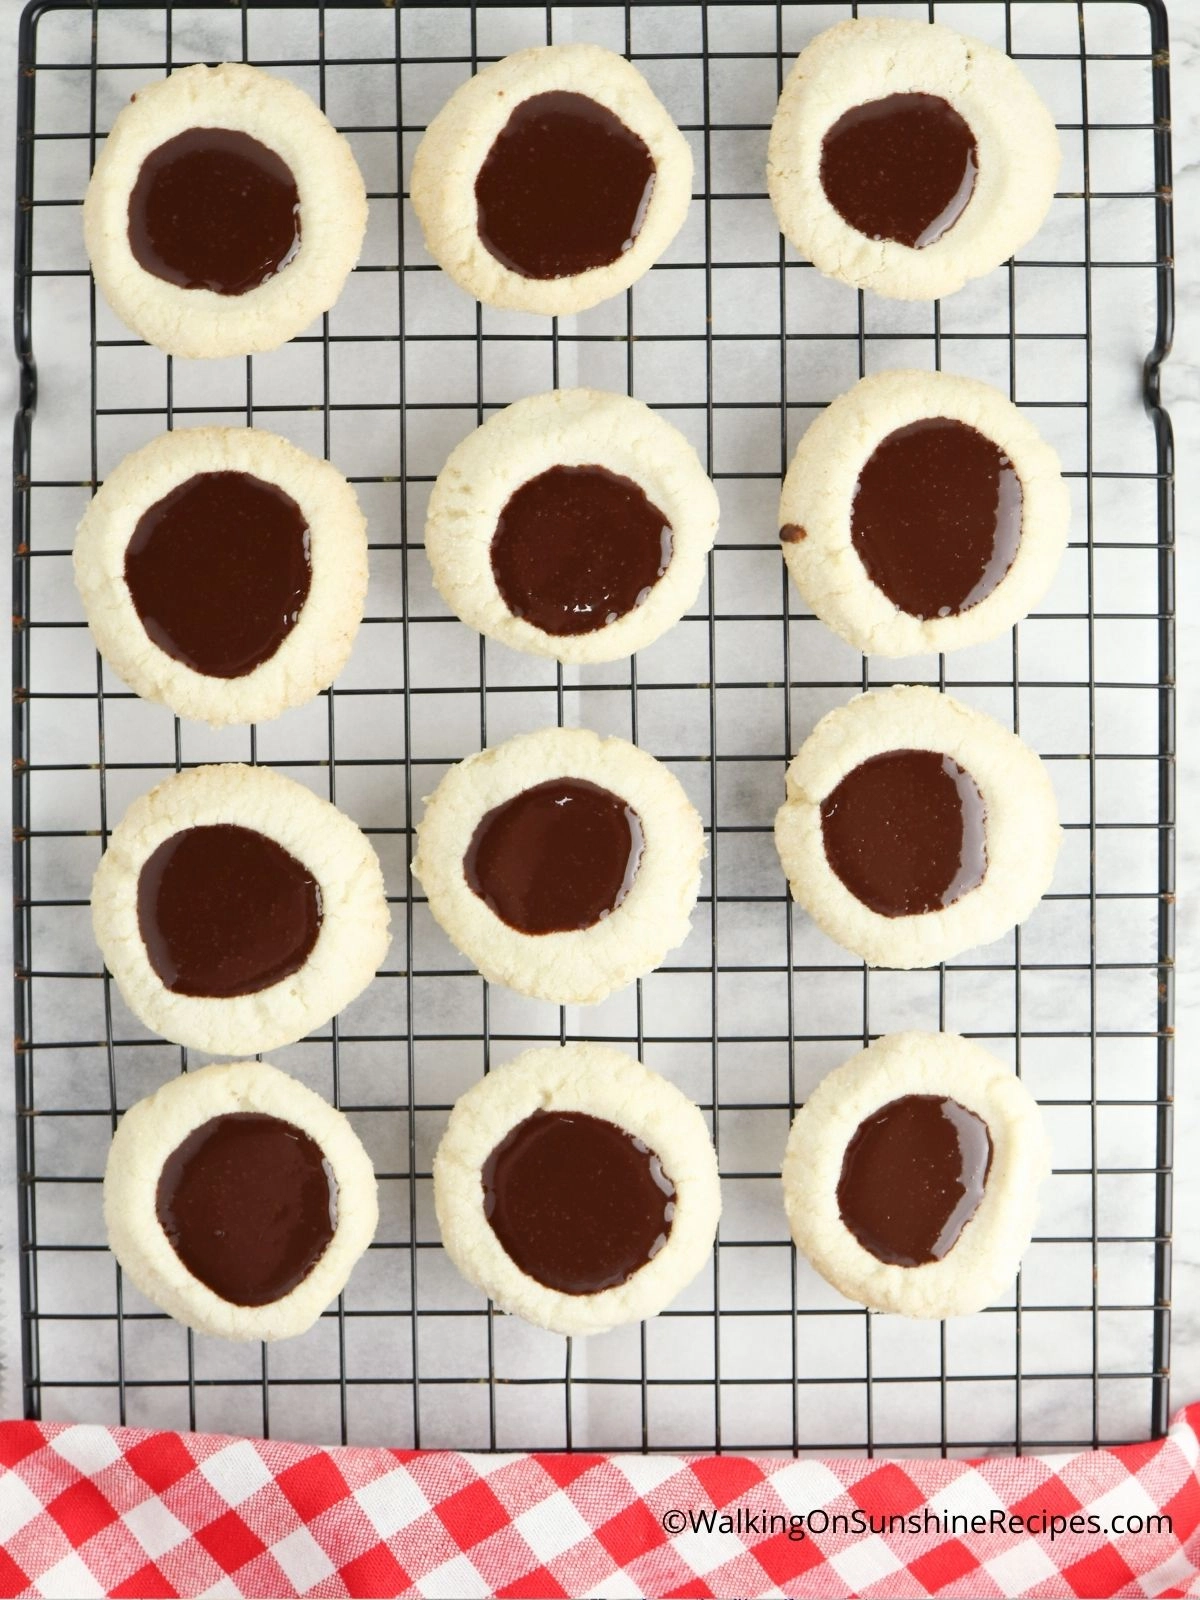 Fill the shortbread thumbprints with the melted chocolate ganache.